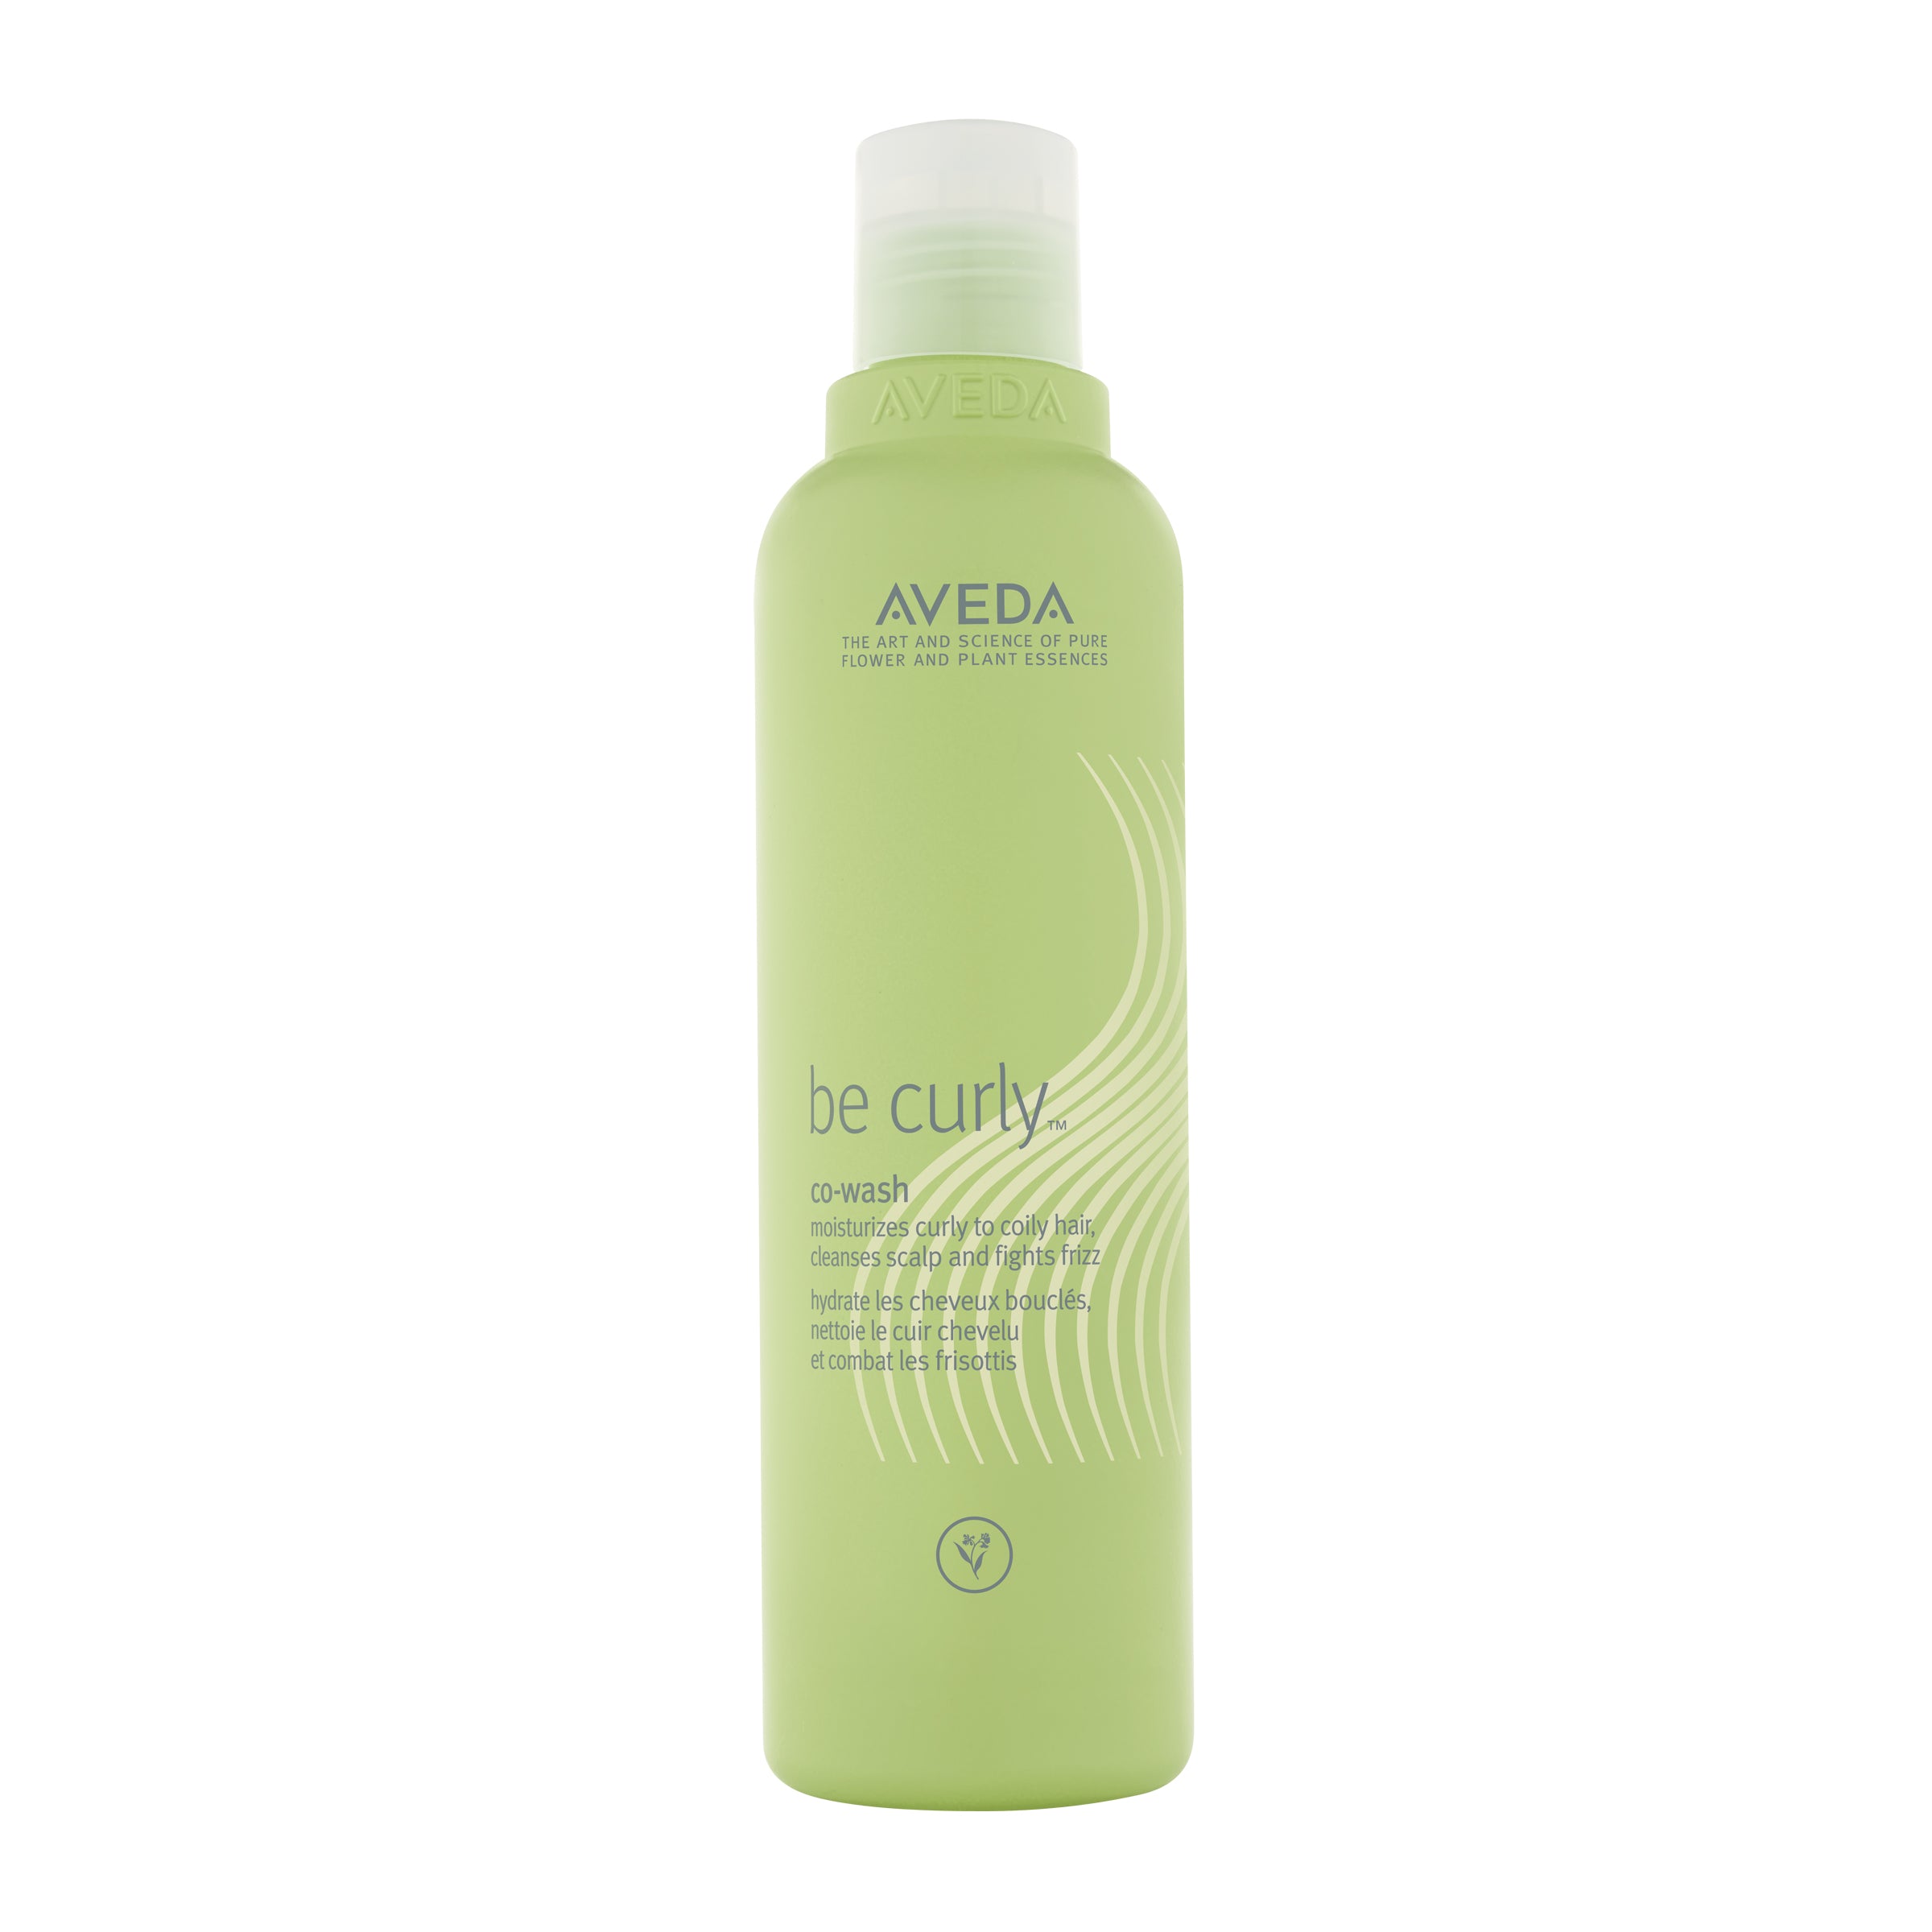 Aveda be curly™ co-wash